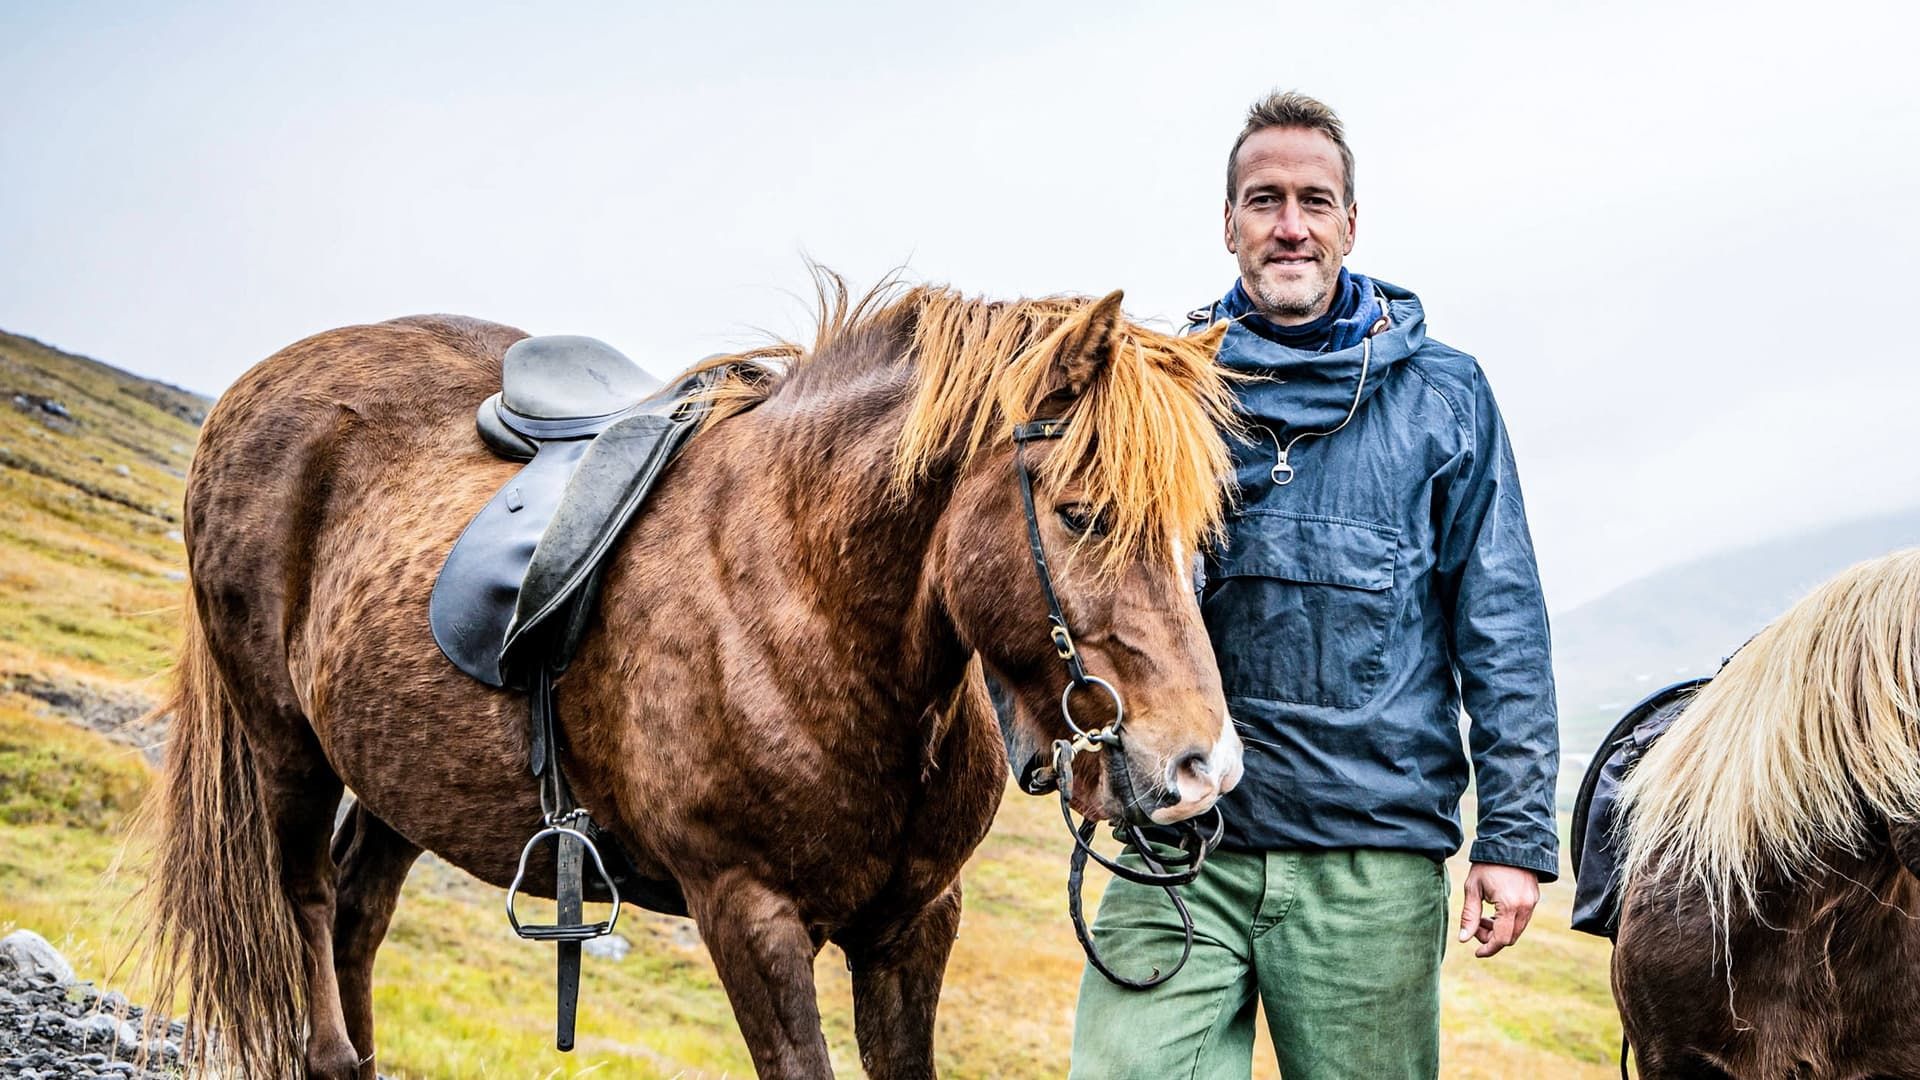 Ben Fogle: New Lives in the Wild background